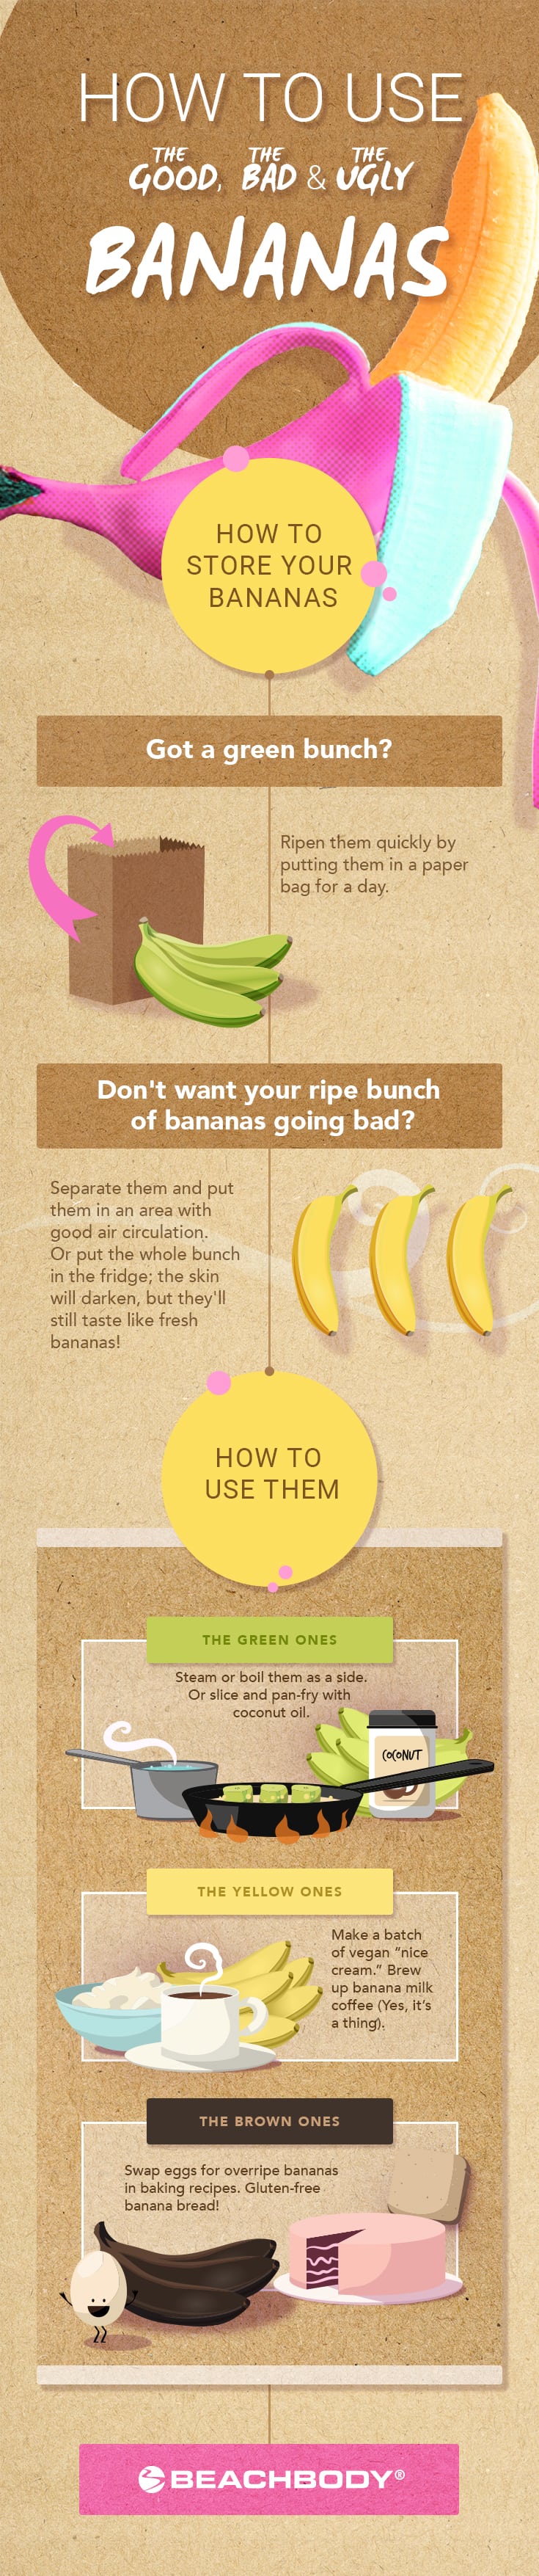 How to Use the Good, the Bad and Ugly Bananas